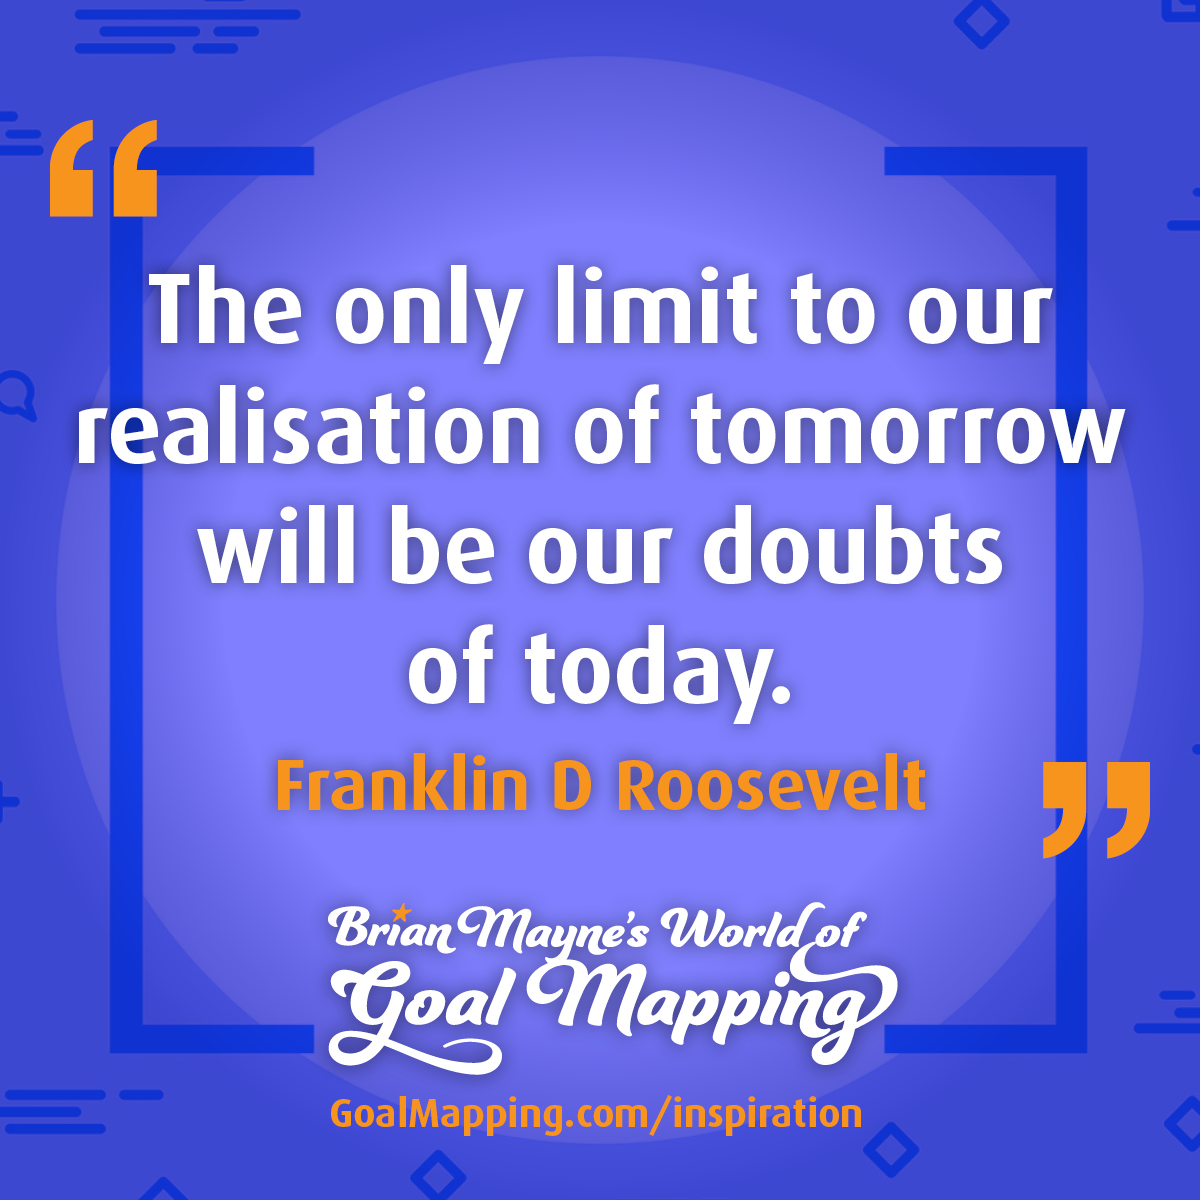 "The only limit to our realisation of tomorrow will be our doubts of today." Franklin D Roosevelt